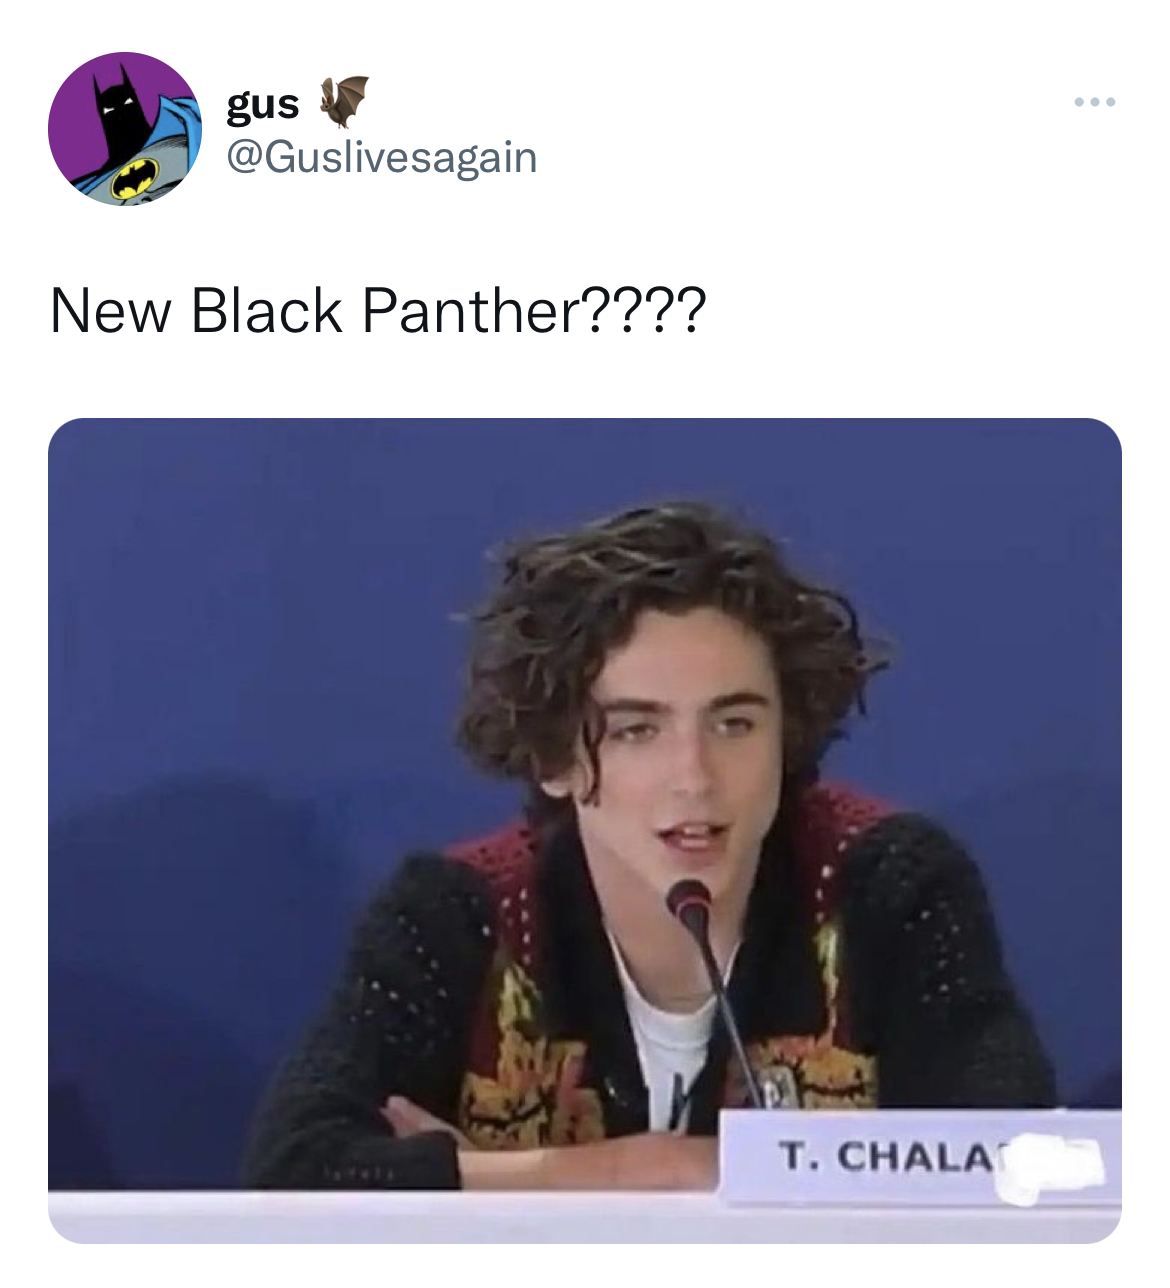 Tweets roasting celebs - album cover - gus New Black Panther???? T. Chala